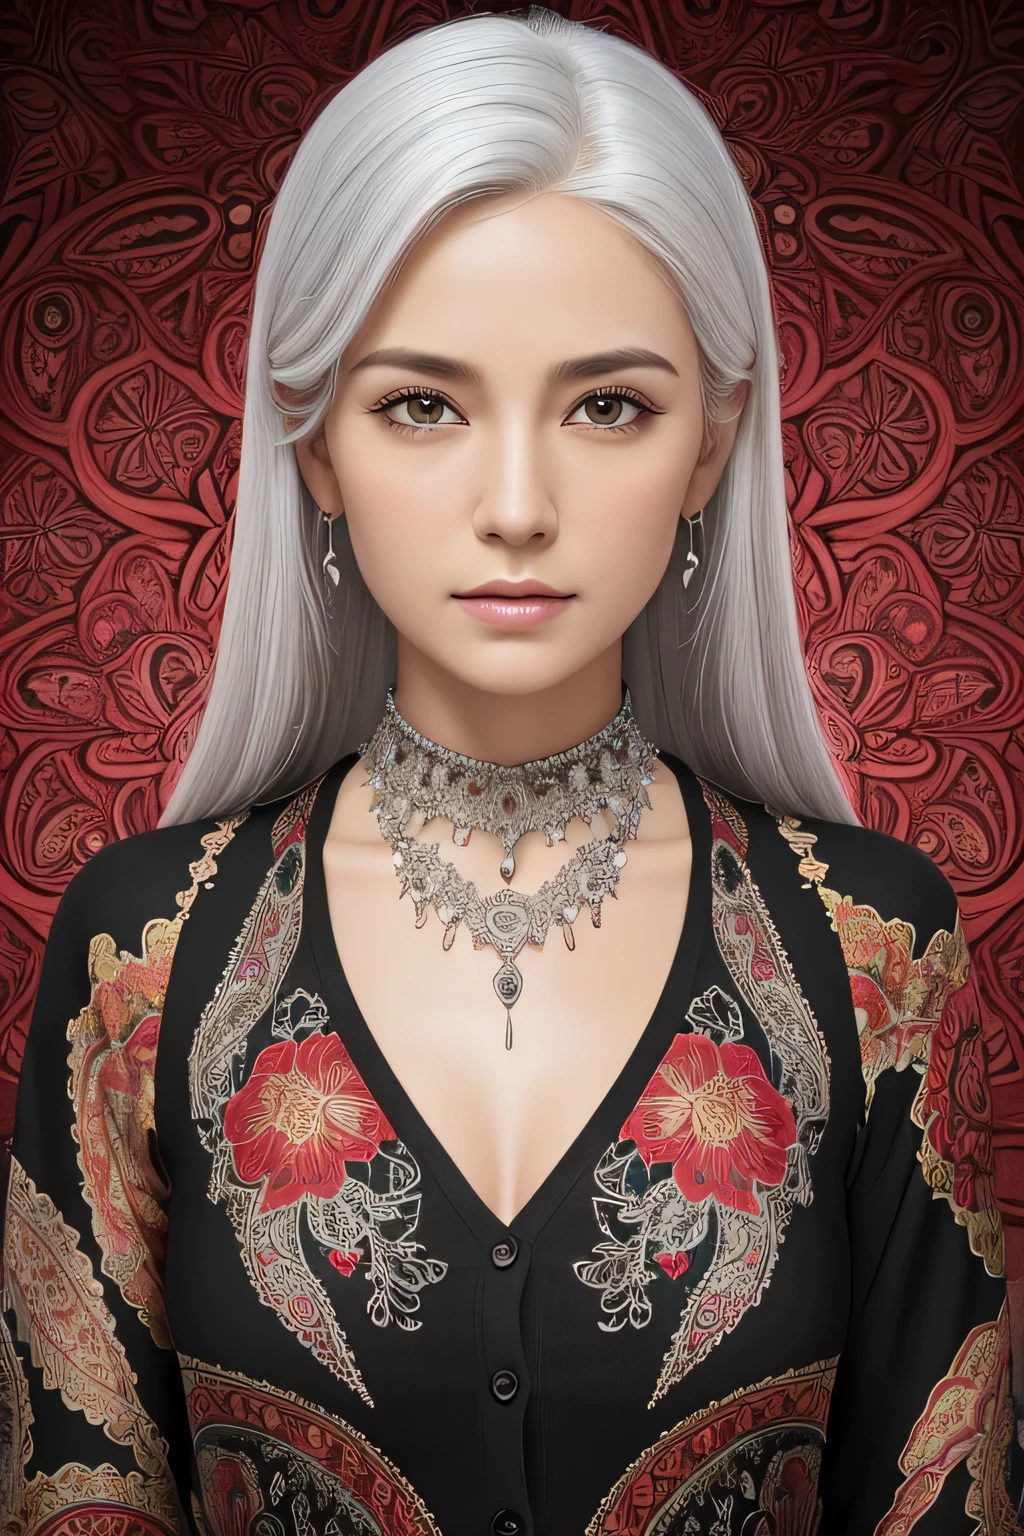 Create a realistic 3D image of a woman that looks similar to the one in the picture.. She should be set against a complex background of fractals and paisleys.. The woman had white hair., white skin, and gentle expression. She wore a black shirt with a red and black floral cardigan. Decorated with a silver necklace decorated with red beads.. The background should be complex., Featuring detailed fractal patterns and paisley designs that are pleasing and artistic..